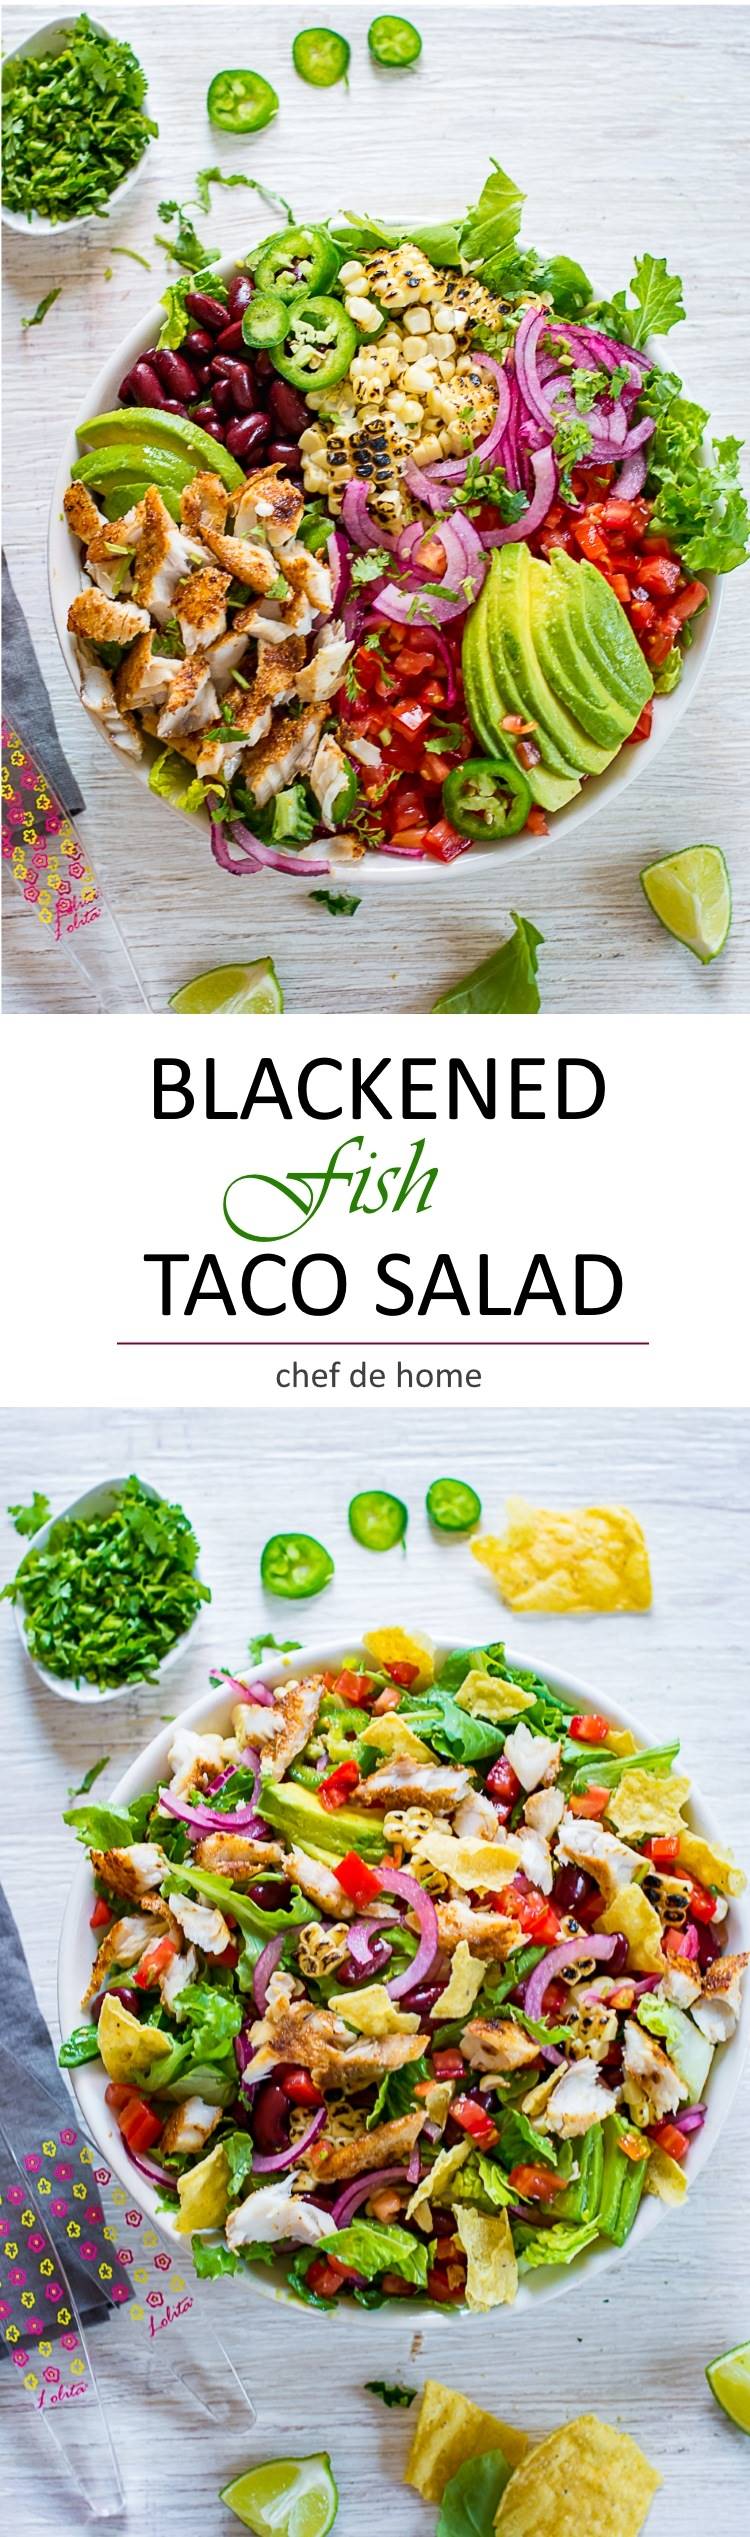 Delicious Blackened Fish Taco Salad for taconight | chefdehome.com